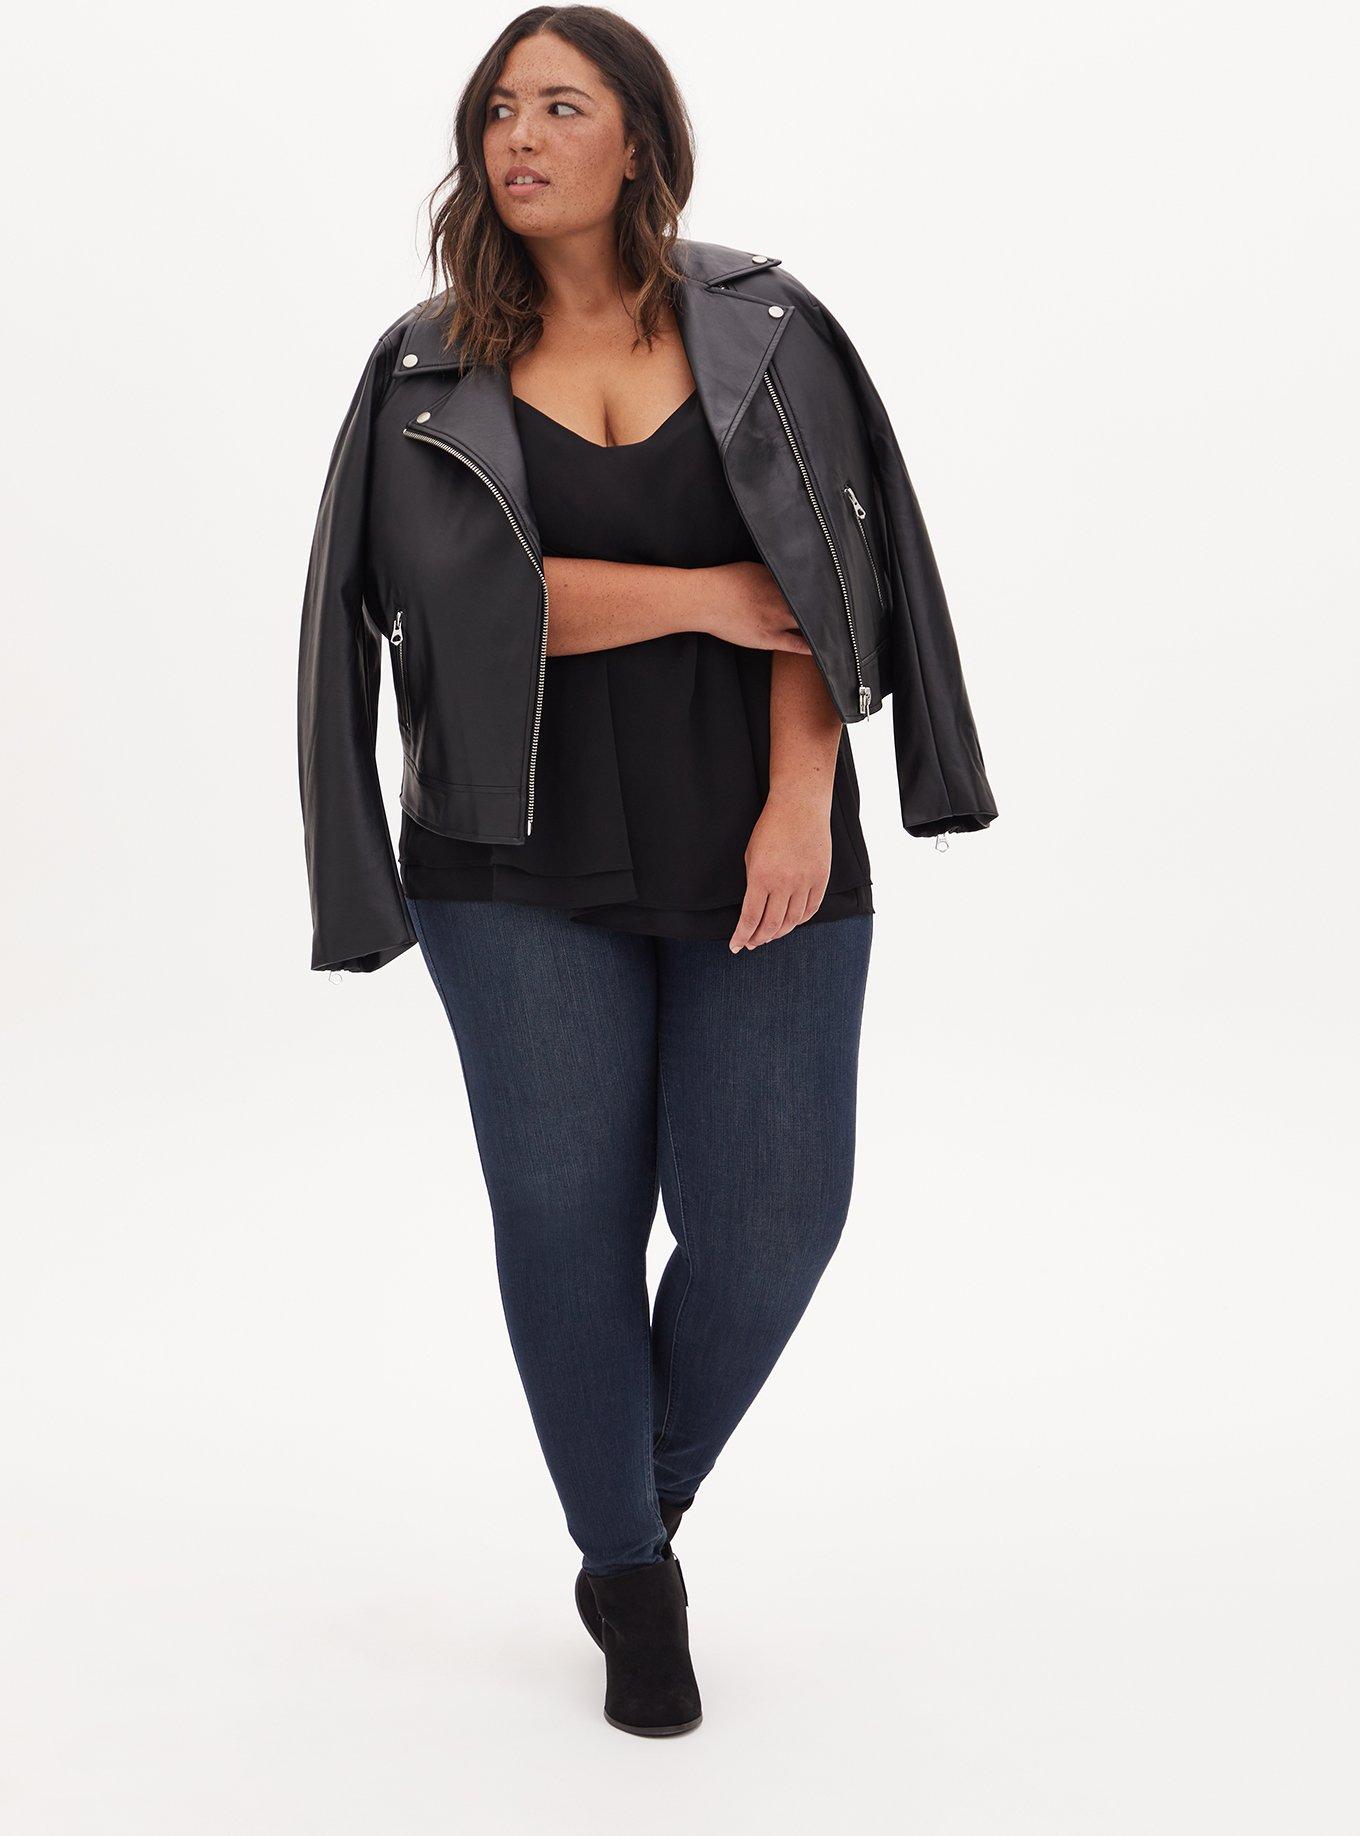 Plus Size Clothing in Thunder Bay, ON at Torrid